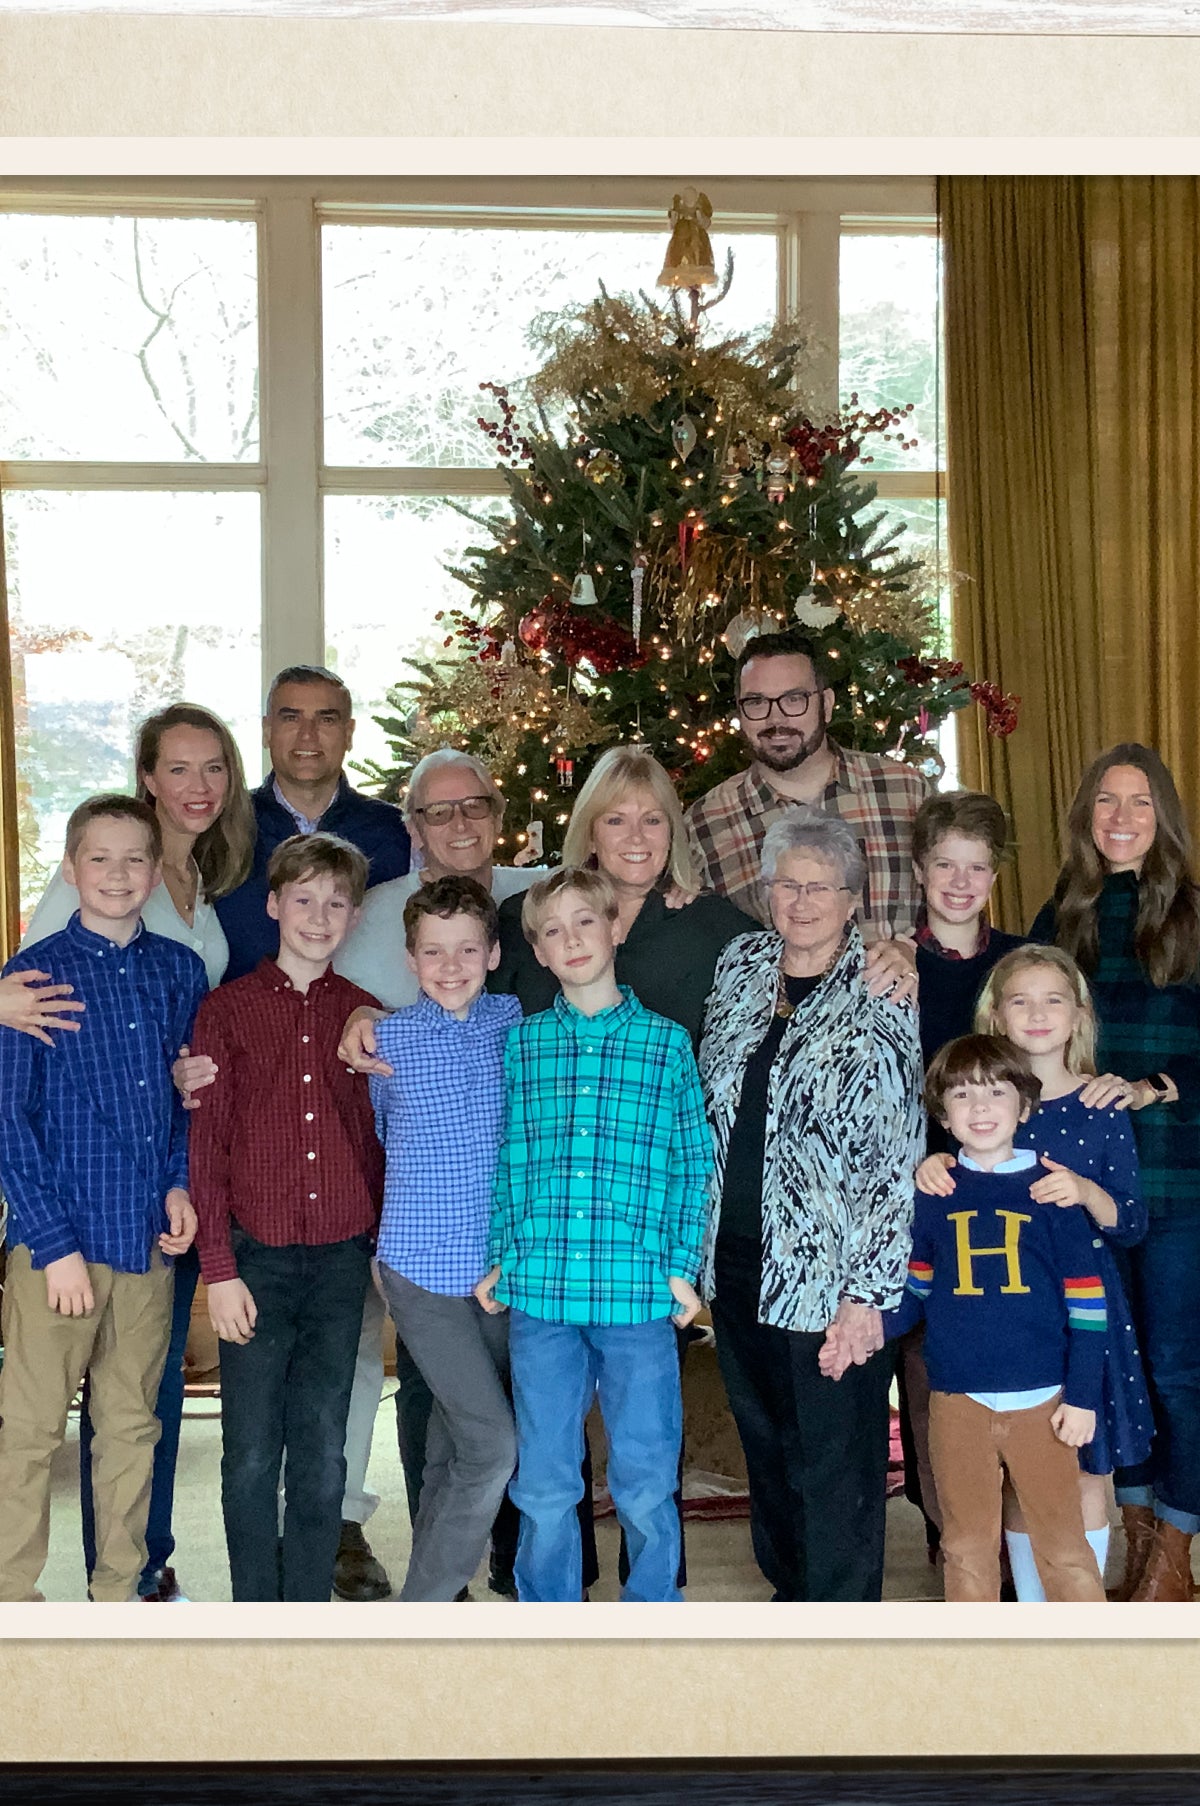 Happy Holidays from my family to yours!